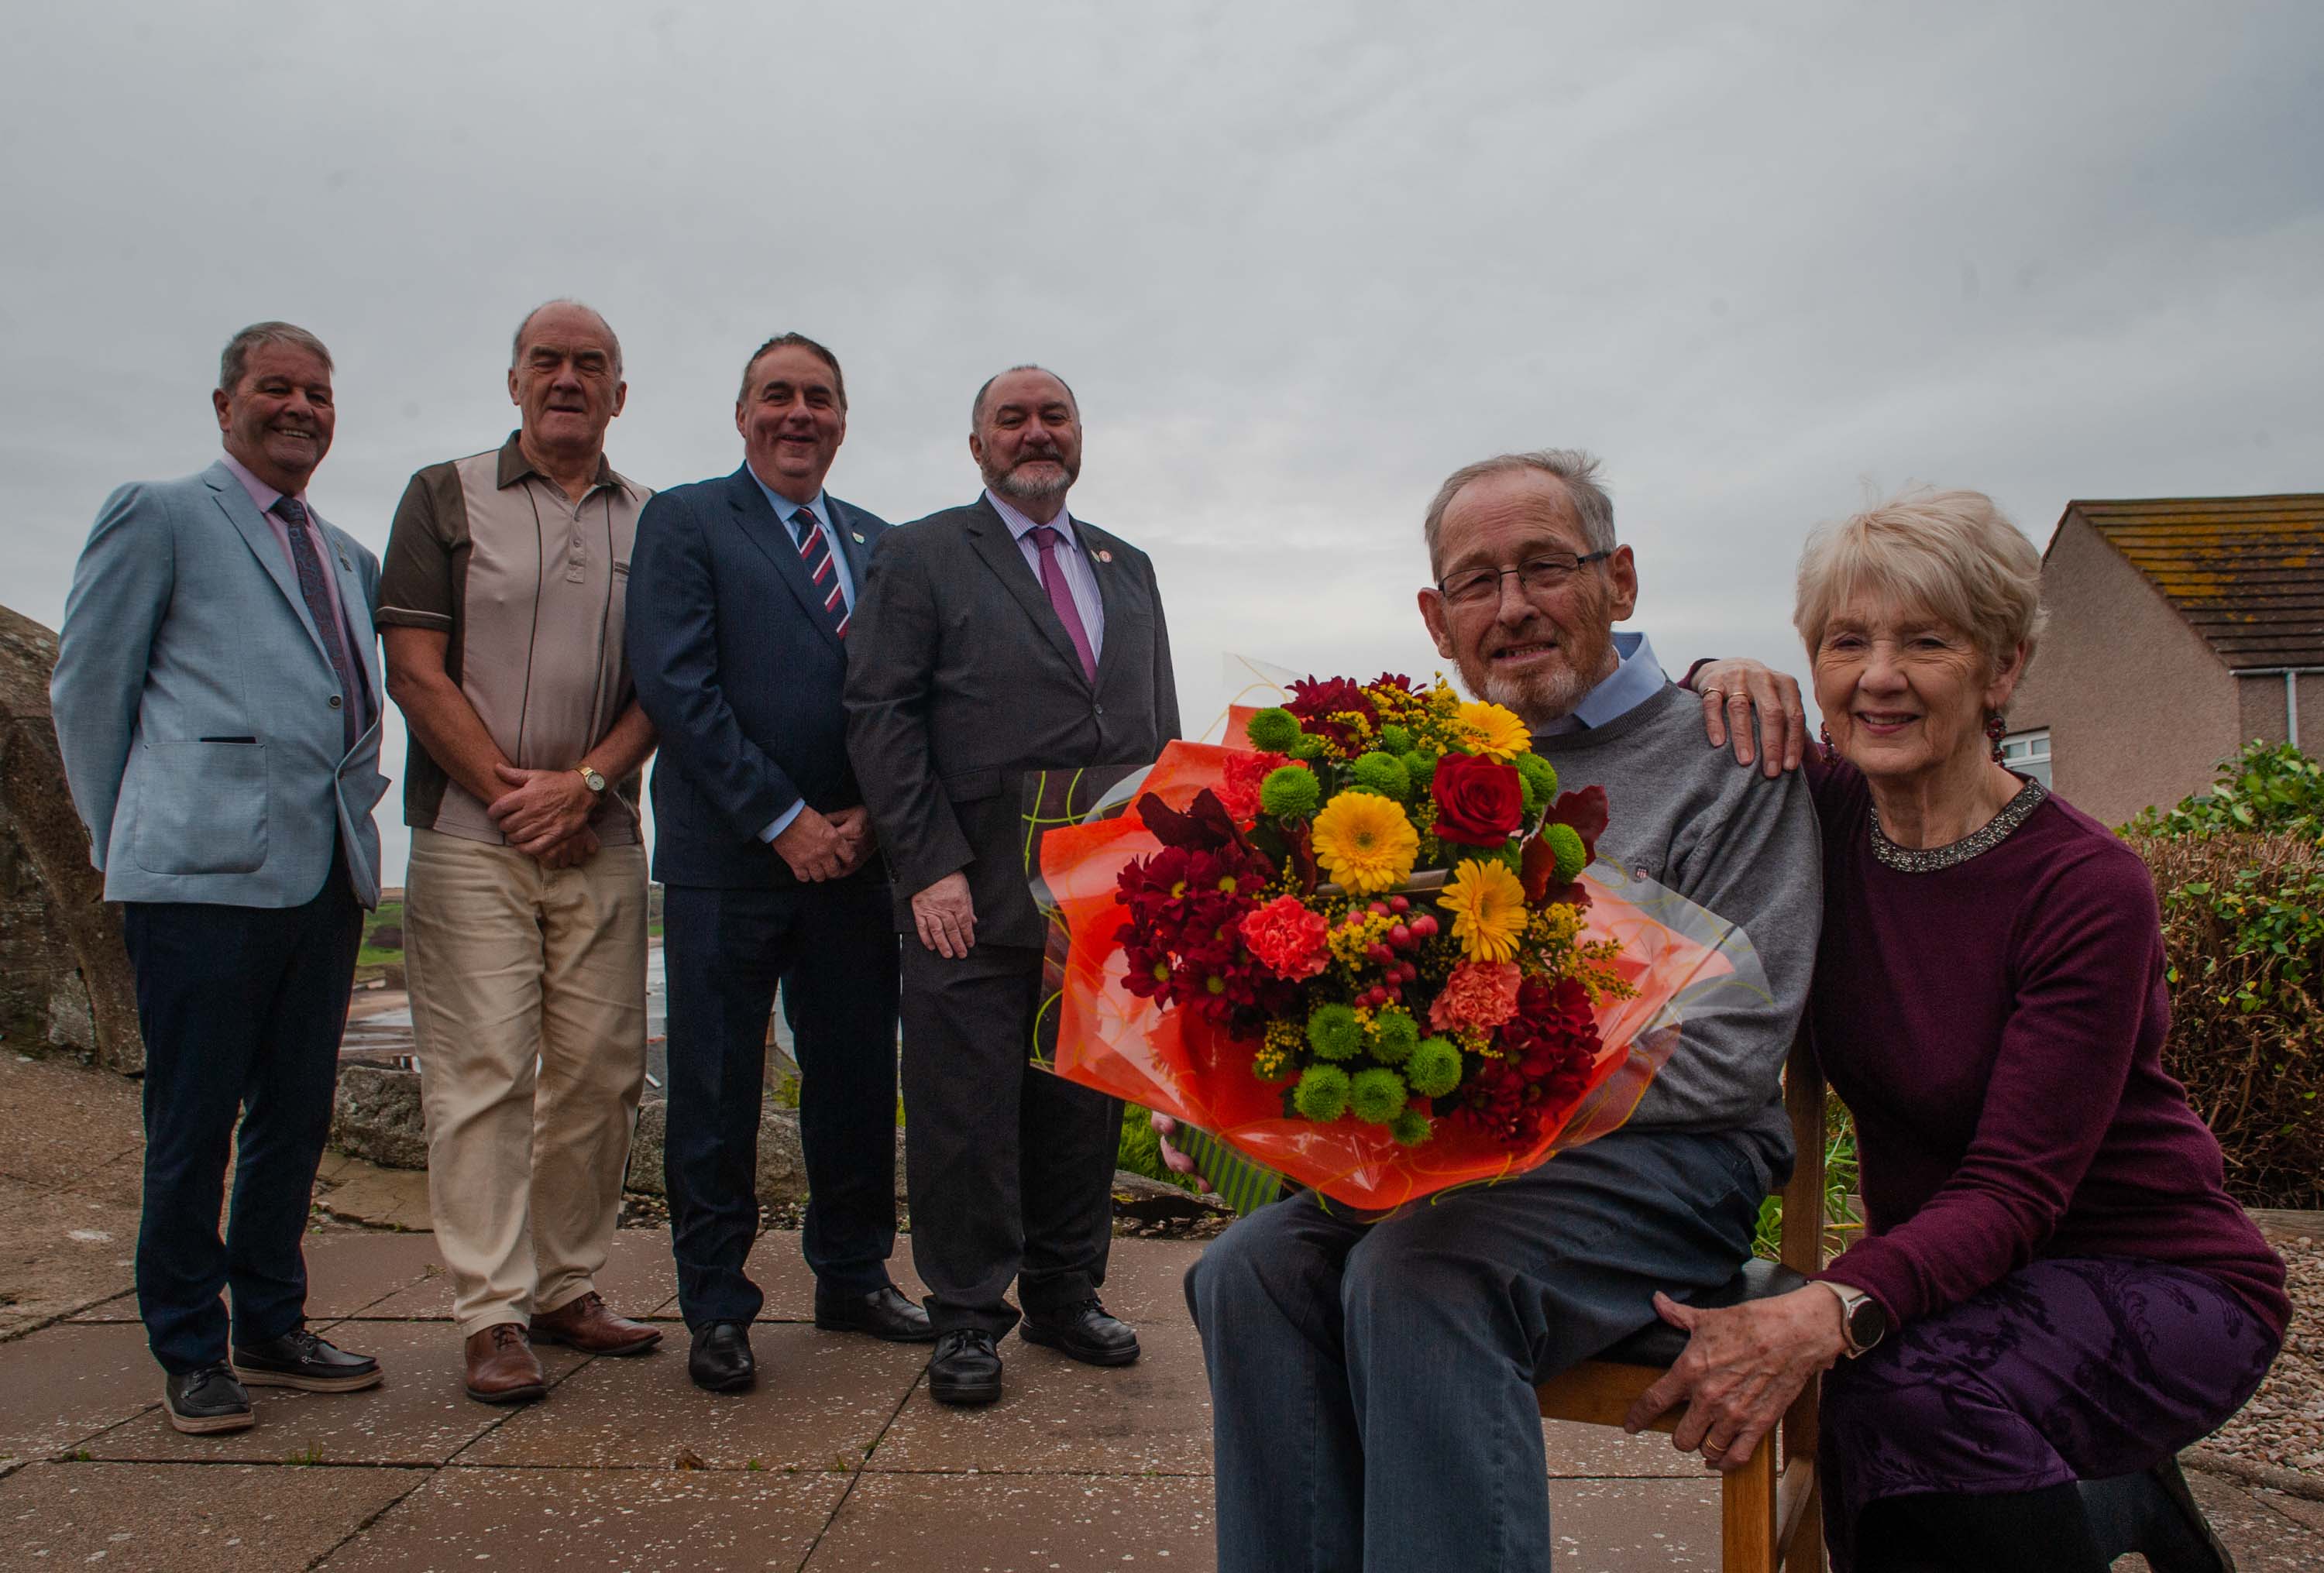 L-R: Councillor Gordon Cowie, Councillor George Alexander, Councillor James Allan, Councillor John Divers Ron Shepherd and his wife Dorothy Shepherd.